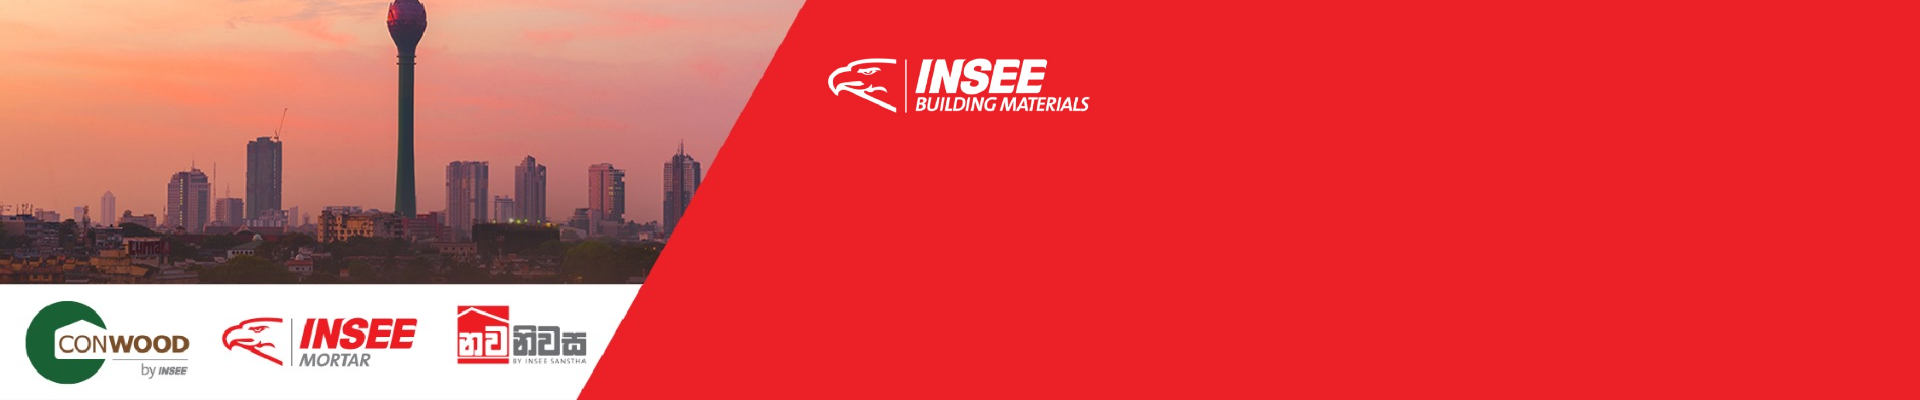 INSEE Building Materials